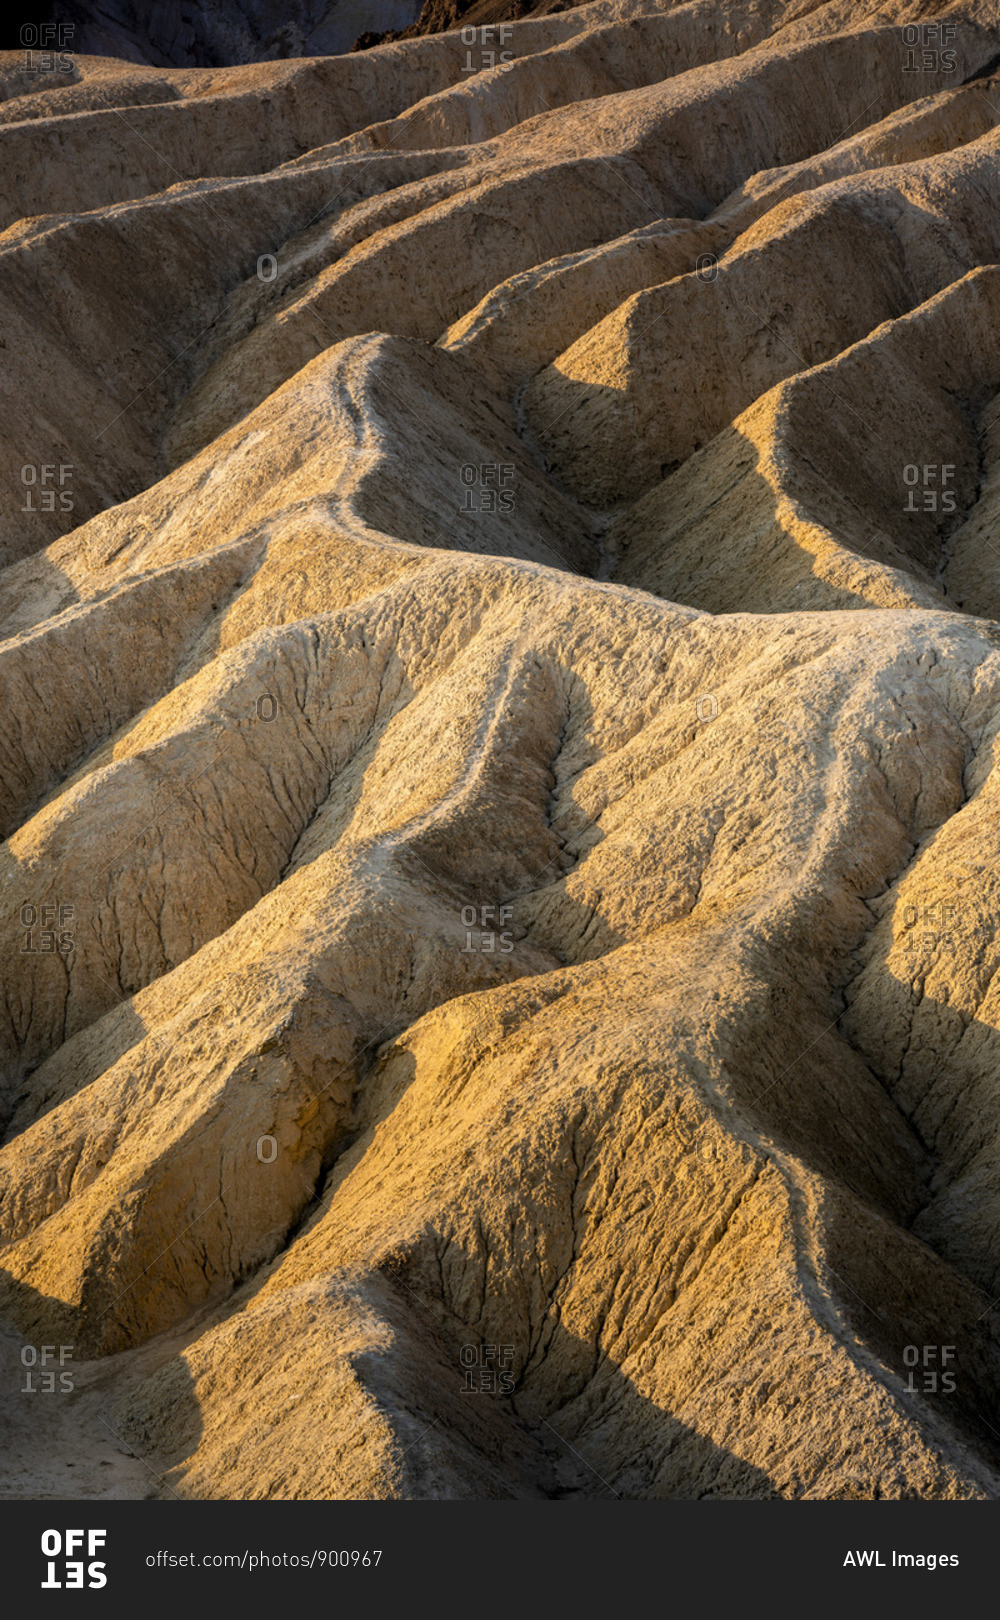 Full frame abstract shot of natural rock formations at Zabriskie Point, Death Valley National Park, Eastern California, California, USA